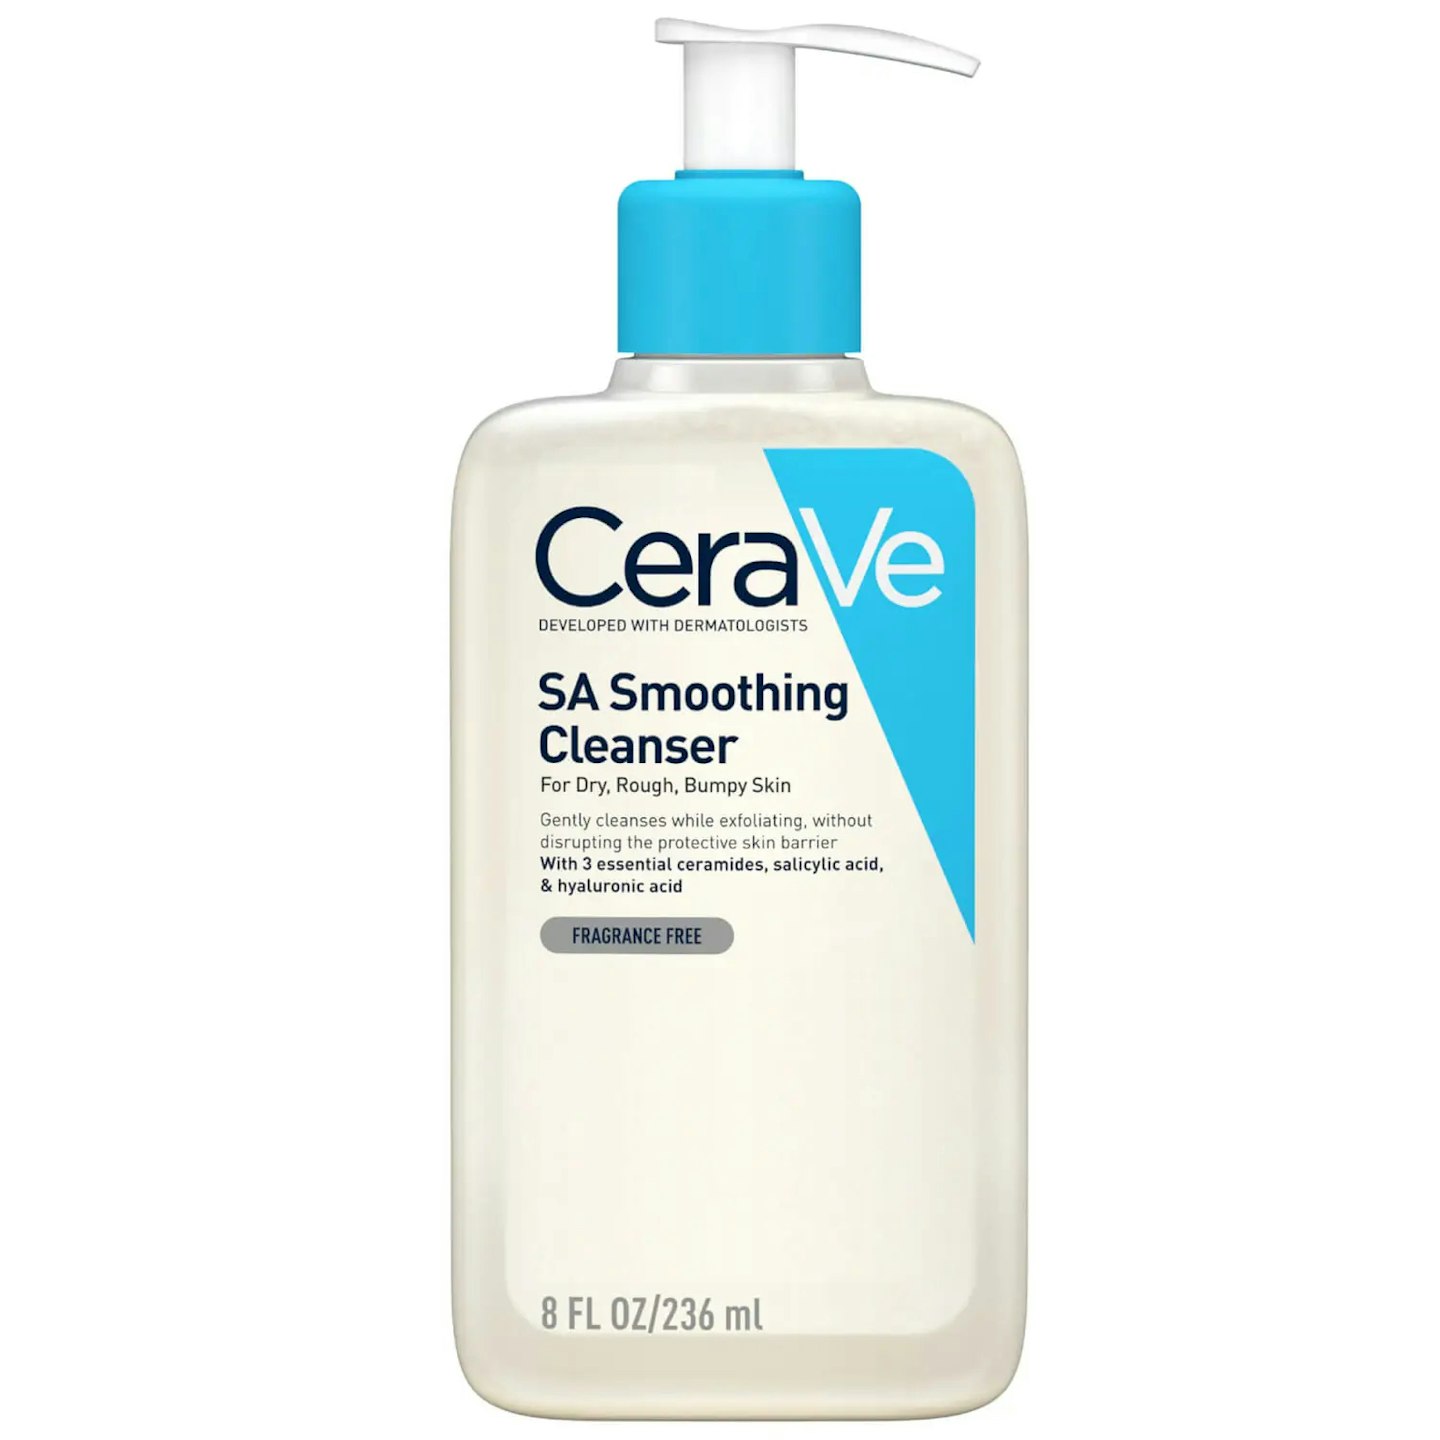 CeraVe SA Smoothing Cleanser for Dry, Rough & BumpySkin